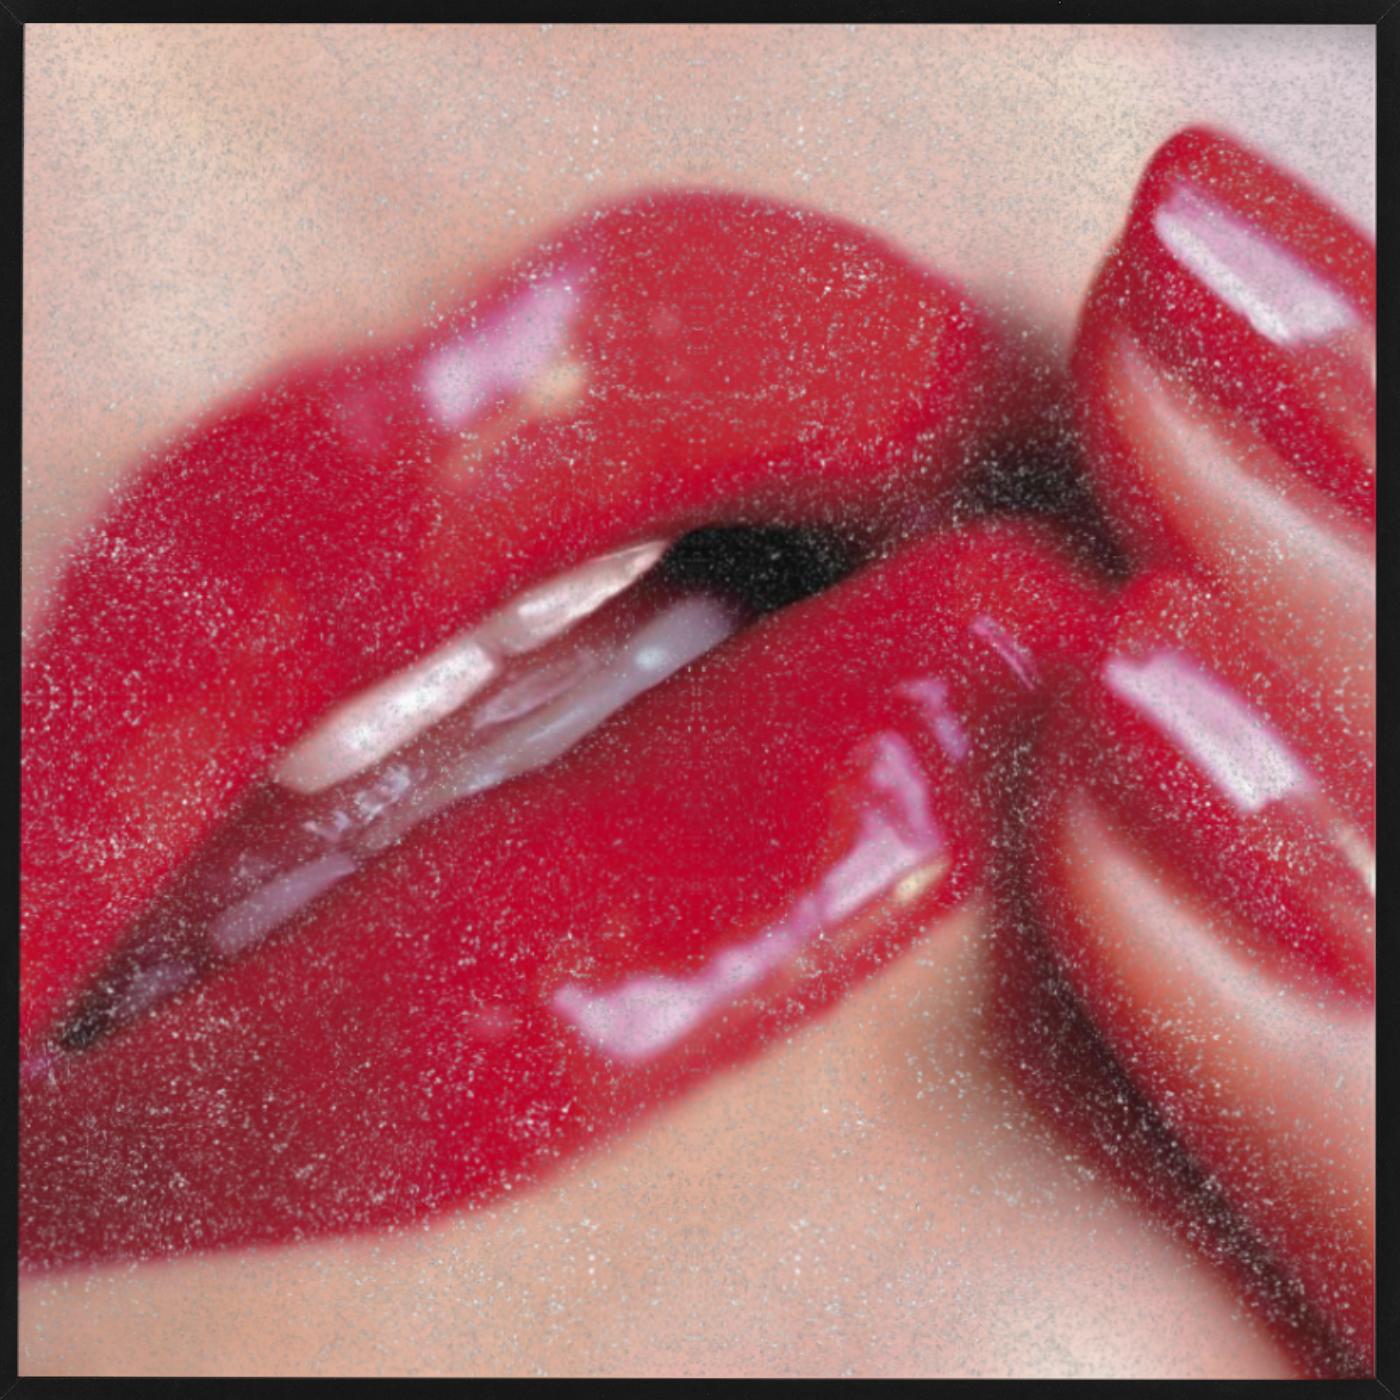 Open to Love Diamond Dust - Close-up of red lips and fingers covered in sparkles - Photograph by Guido Argentini